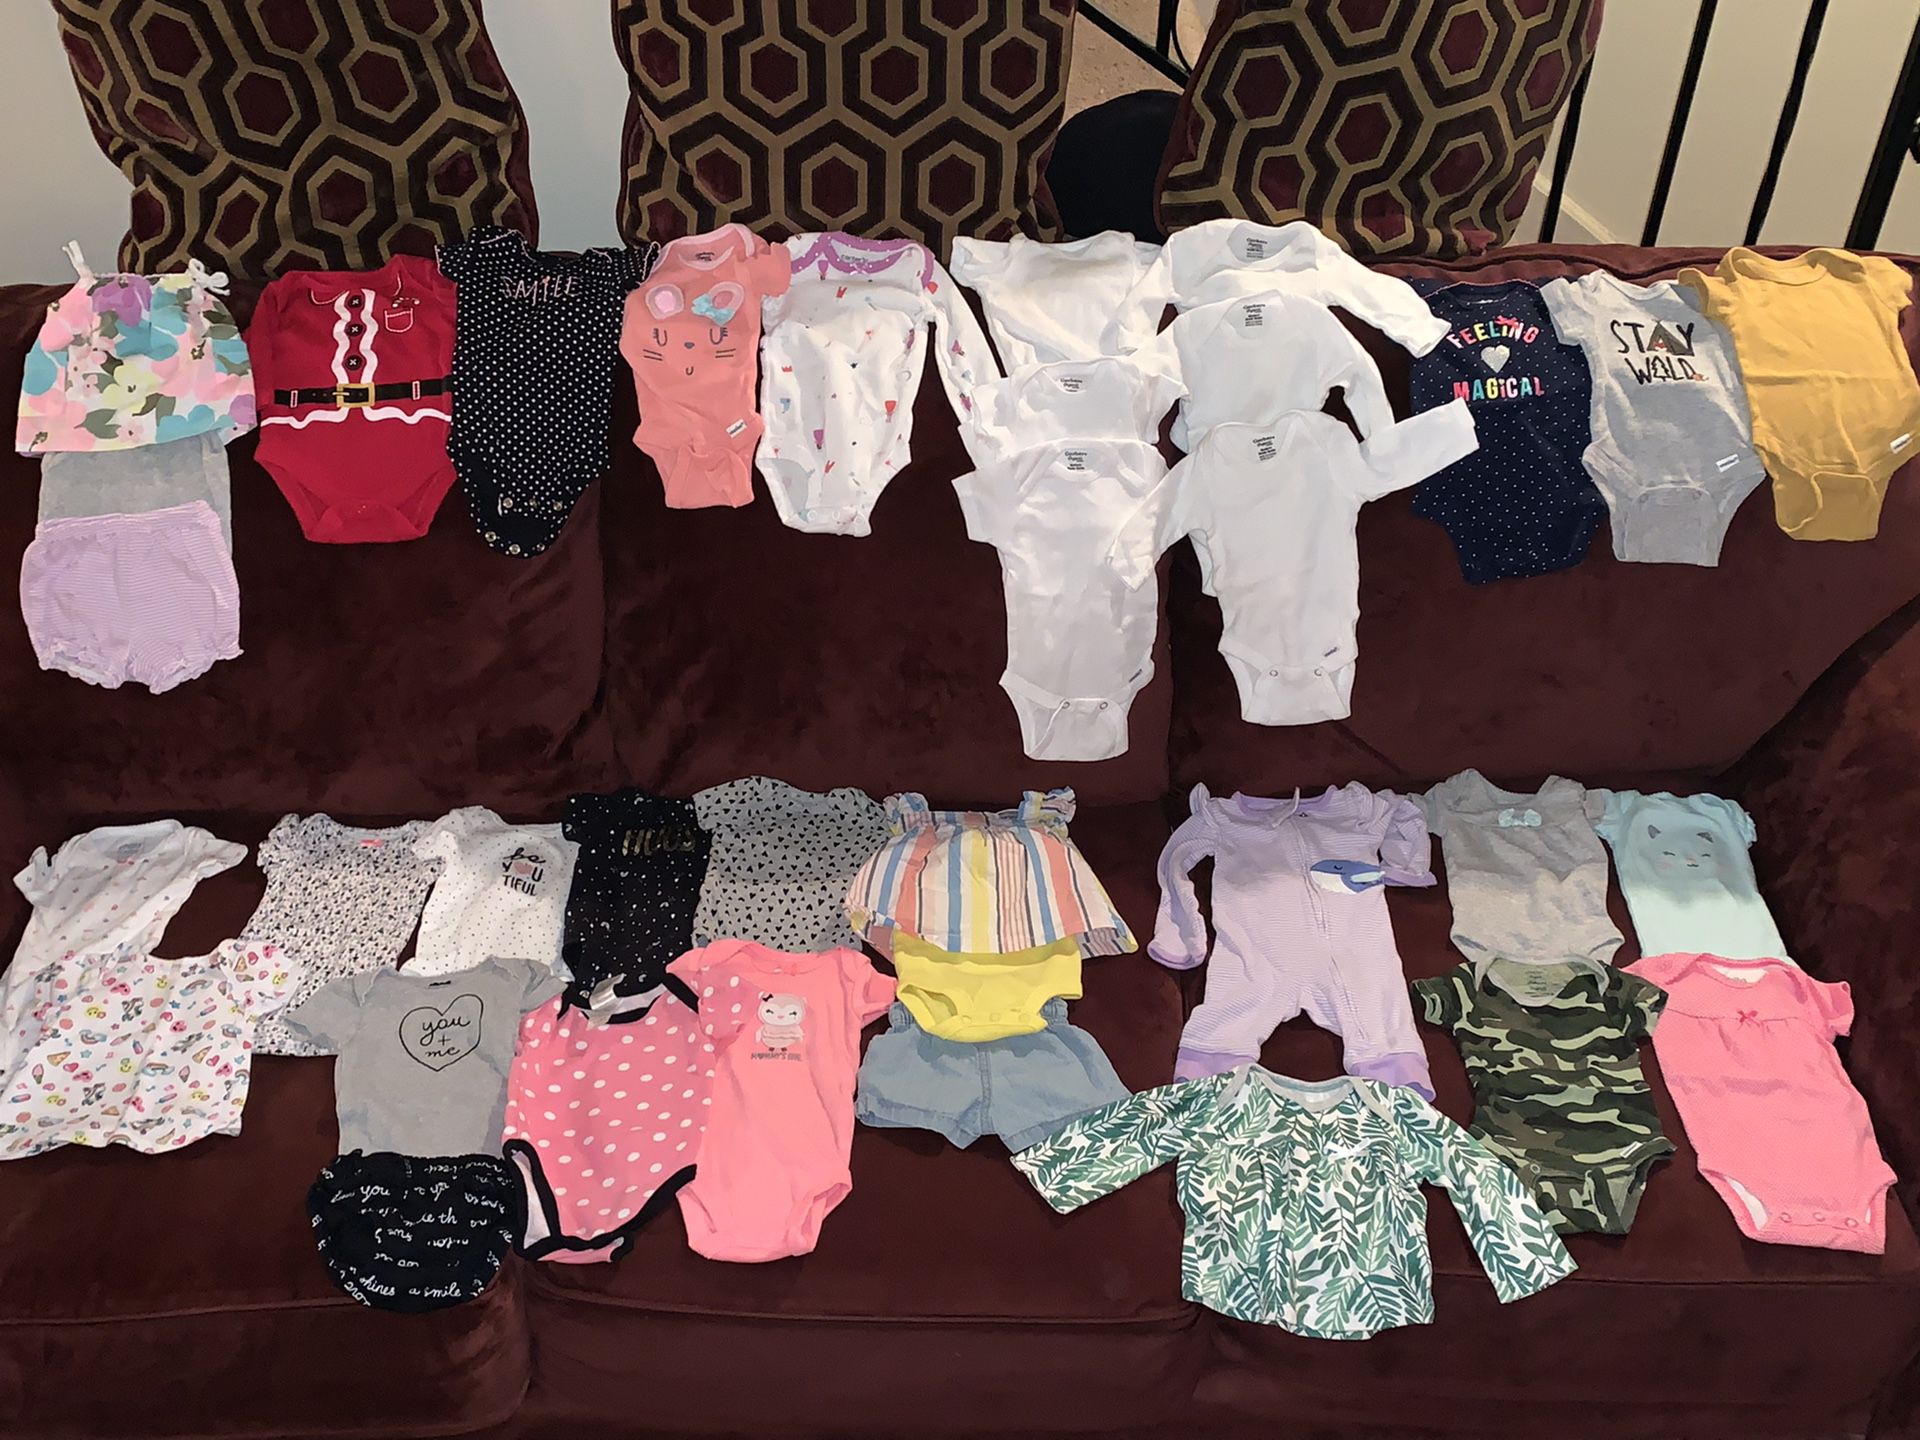 SALEING IN A BUNDLE‼️ (69 NEWBORN BABY CLOTHES )ONLY WORN ONE TIME